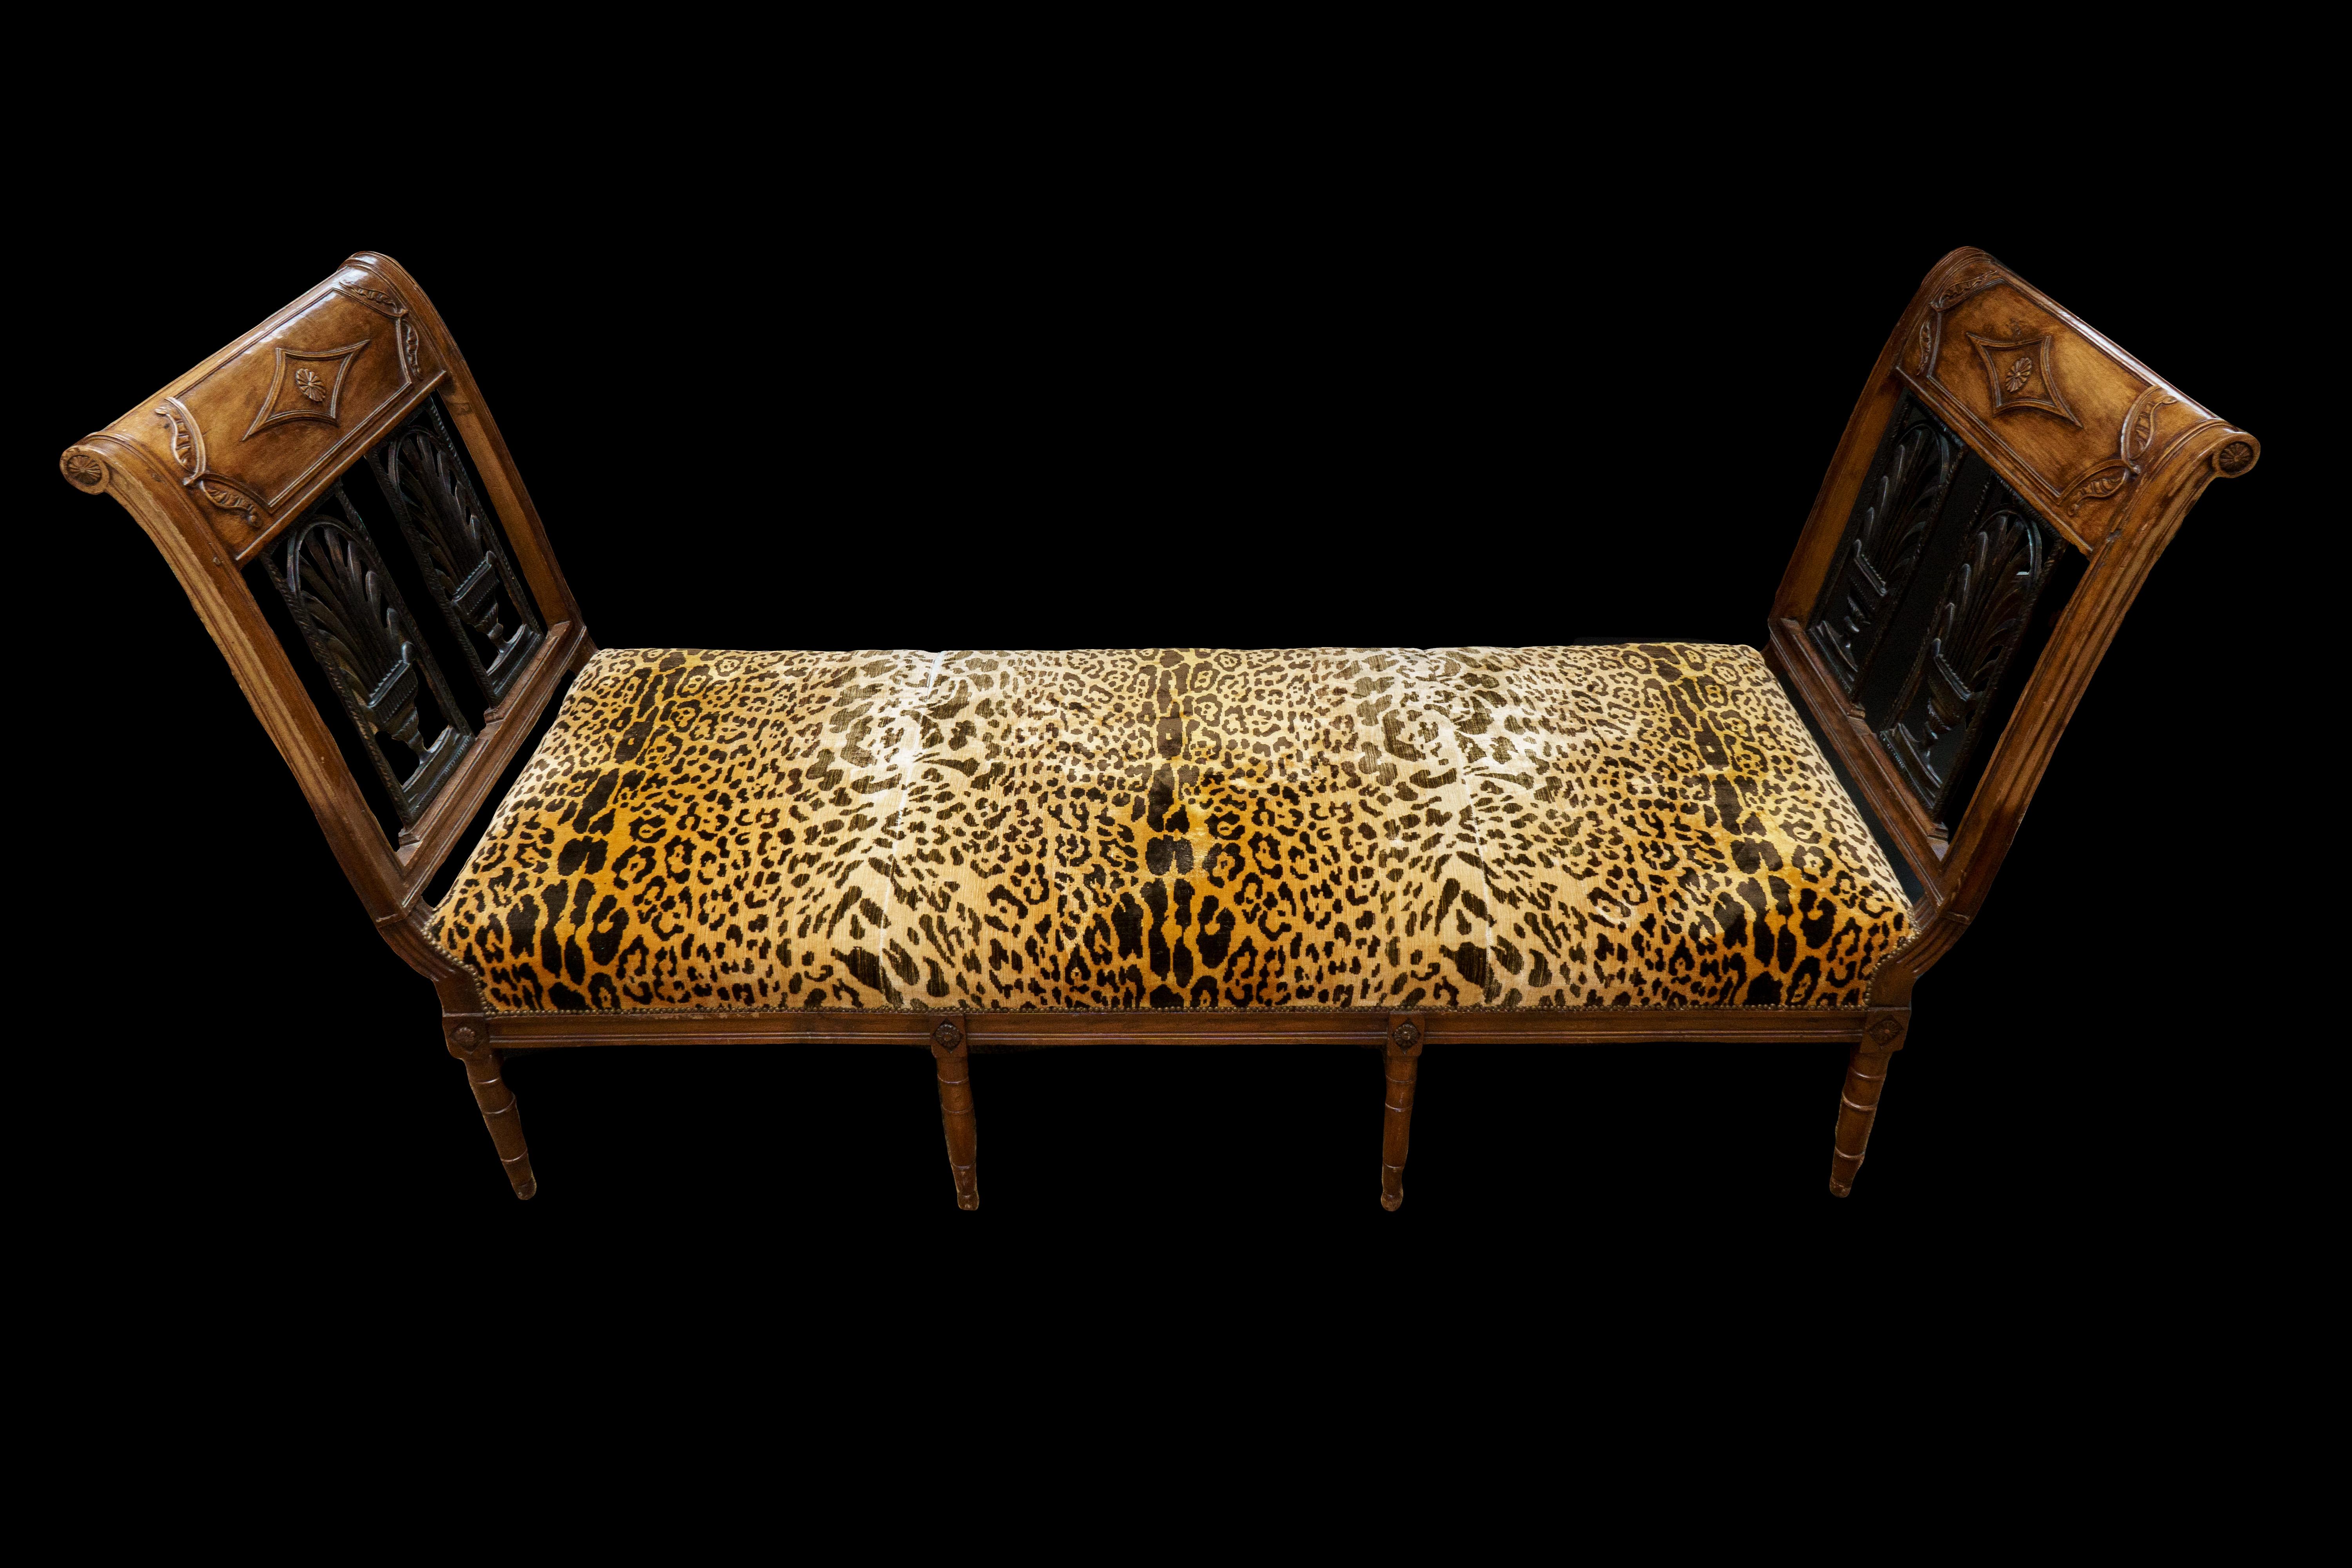 A Directoire Mahogany Stained Fruitwood Banquette/Daybed with Le Manach Leopard fabric from Pierre Frey -circa 1800

Measures: 82